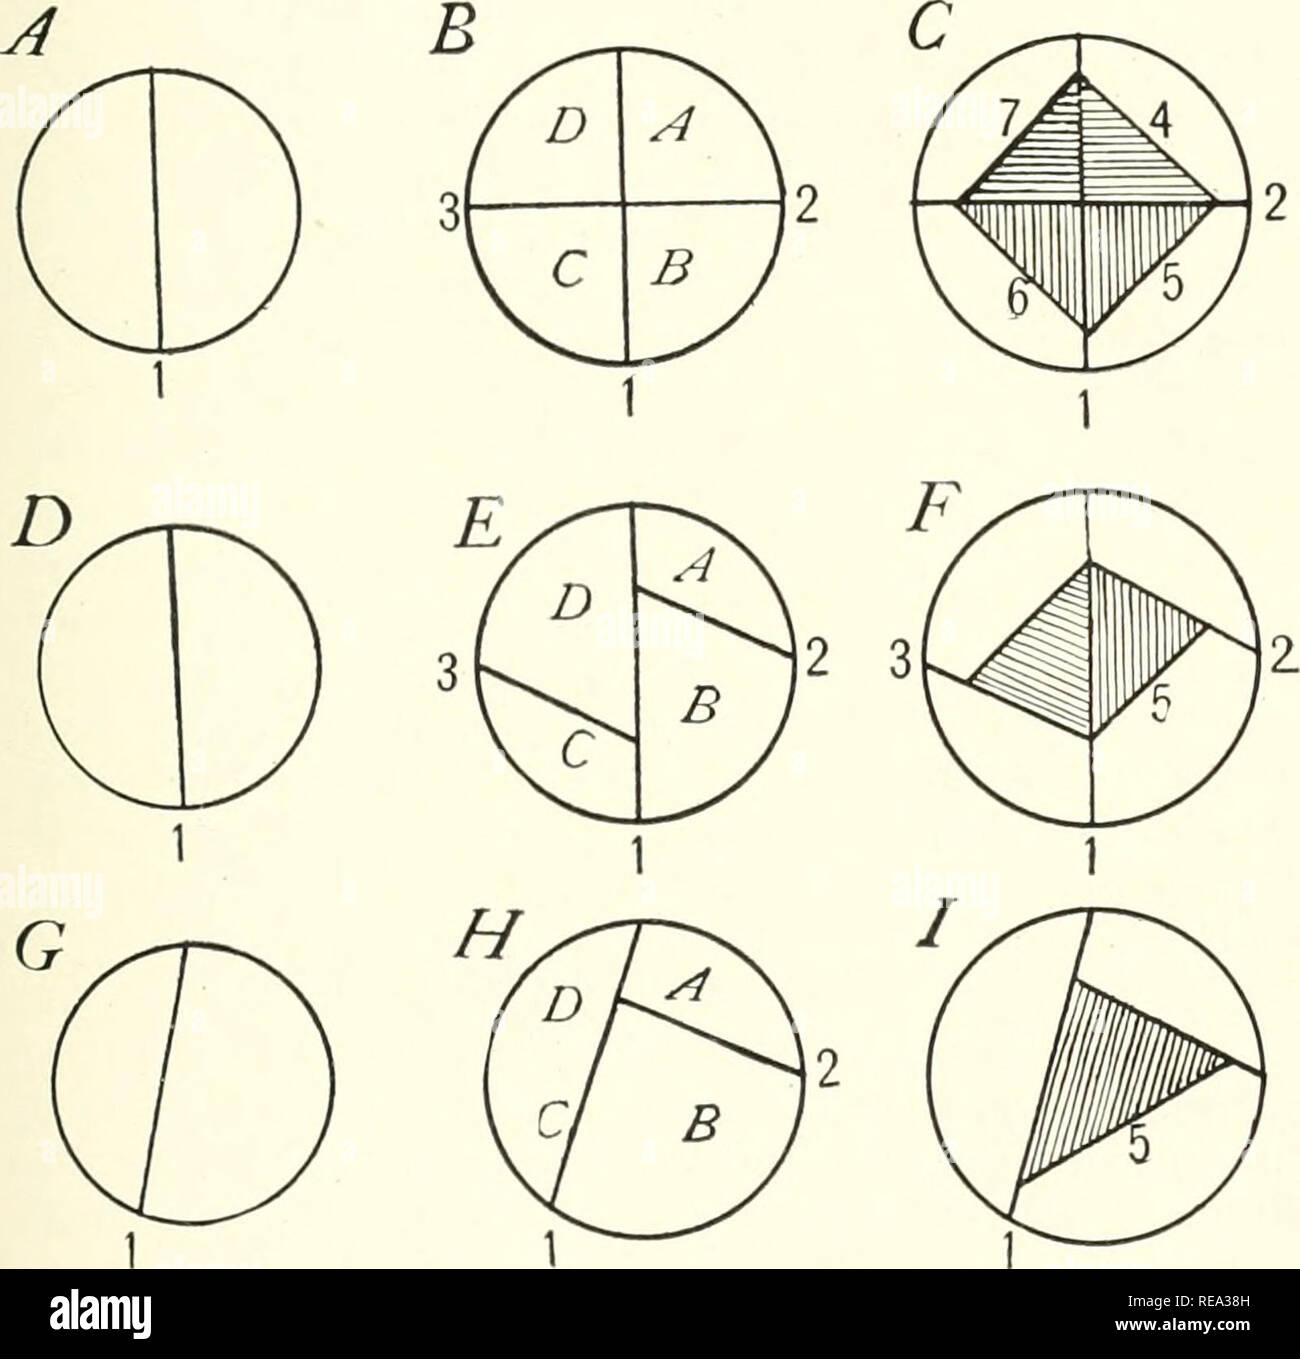 . Contributions from the Hull Botanical Laboratory. Plants. BOTANICAL GAZETTE characteristic of Marchantiales digs. A, By C), the vertical median wall (i) is followed by two walls (2 and 3) at right angles to the former, thereby forming quadrants {A, B, C, D). Four periclinal walls (4, 5, 6, 7) form a sterile wall cell and a spermatogenous cell. Fig. 1.—Explanation in text from each quadrant. In the Jungermanniales form (figs. D, E, F) the median vertical wall is followed by two walls corresponding to the second and third above, but somewhat inclined (2, 3, fig. E). Periclinal walls (5, 7) for Stock Photo